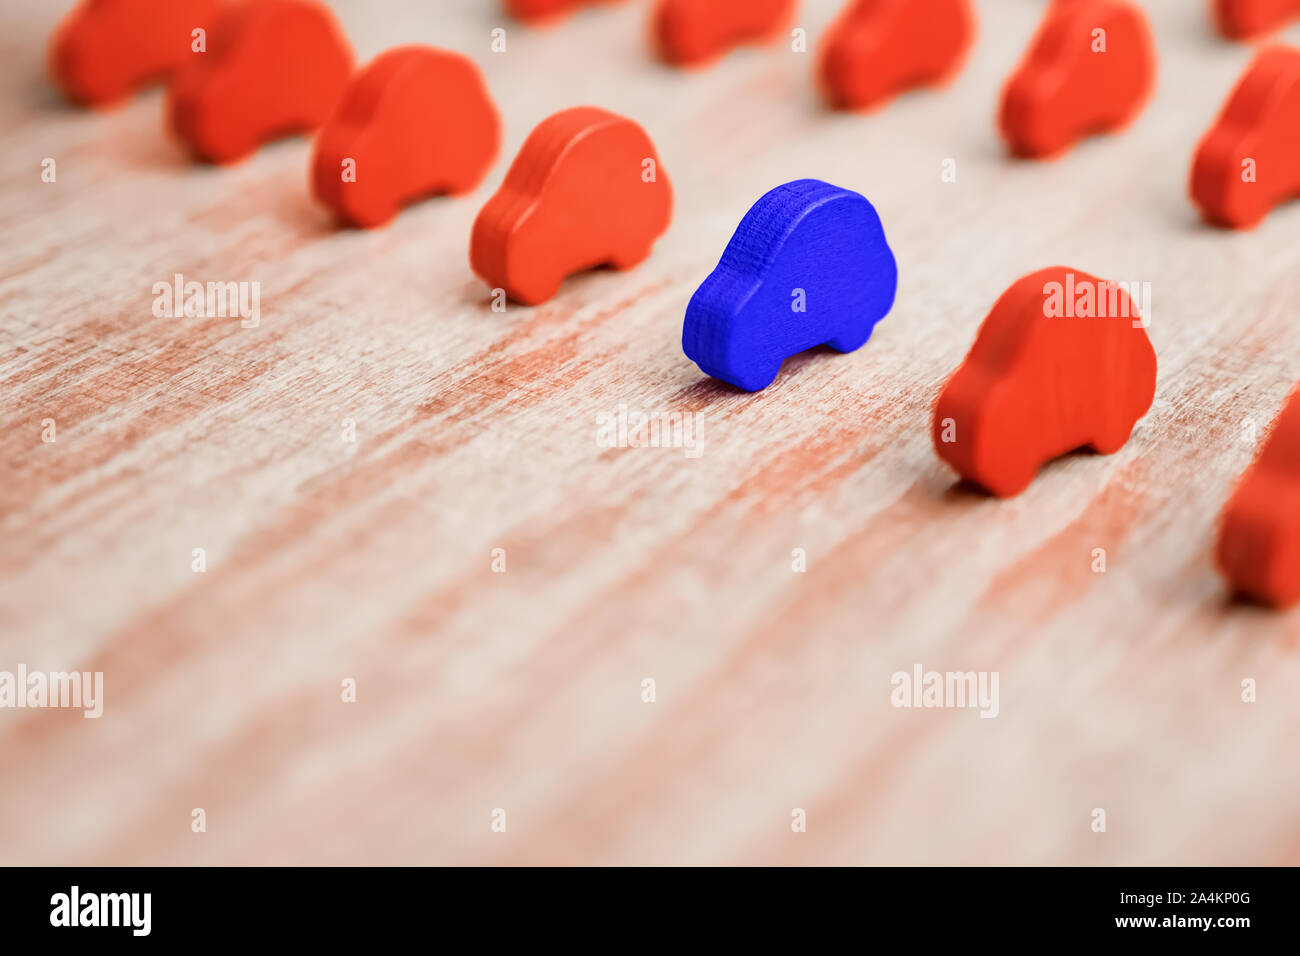 Standing out from crowd. One object differs from others. Equal opportunities. Think different idea. Competition, rivalry background. Toy cars in the range on wooden background. Business concept Stock Photo